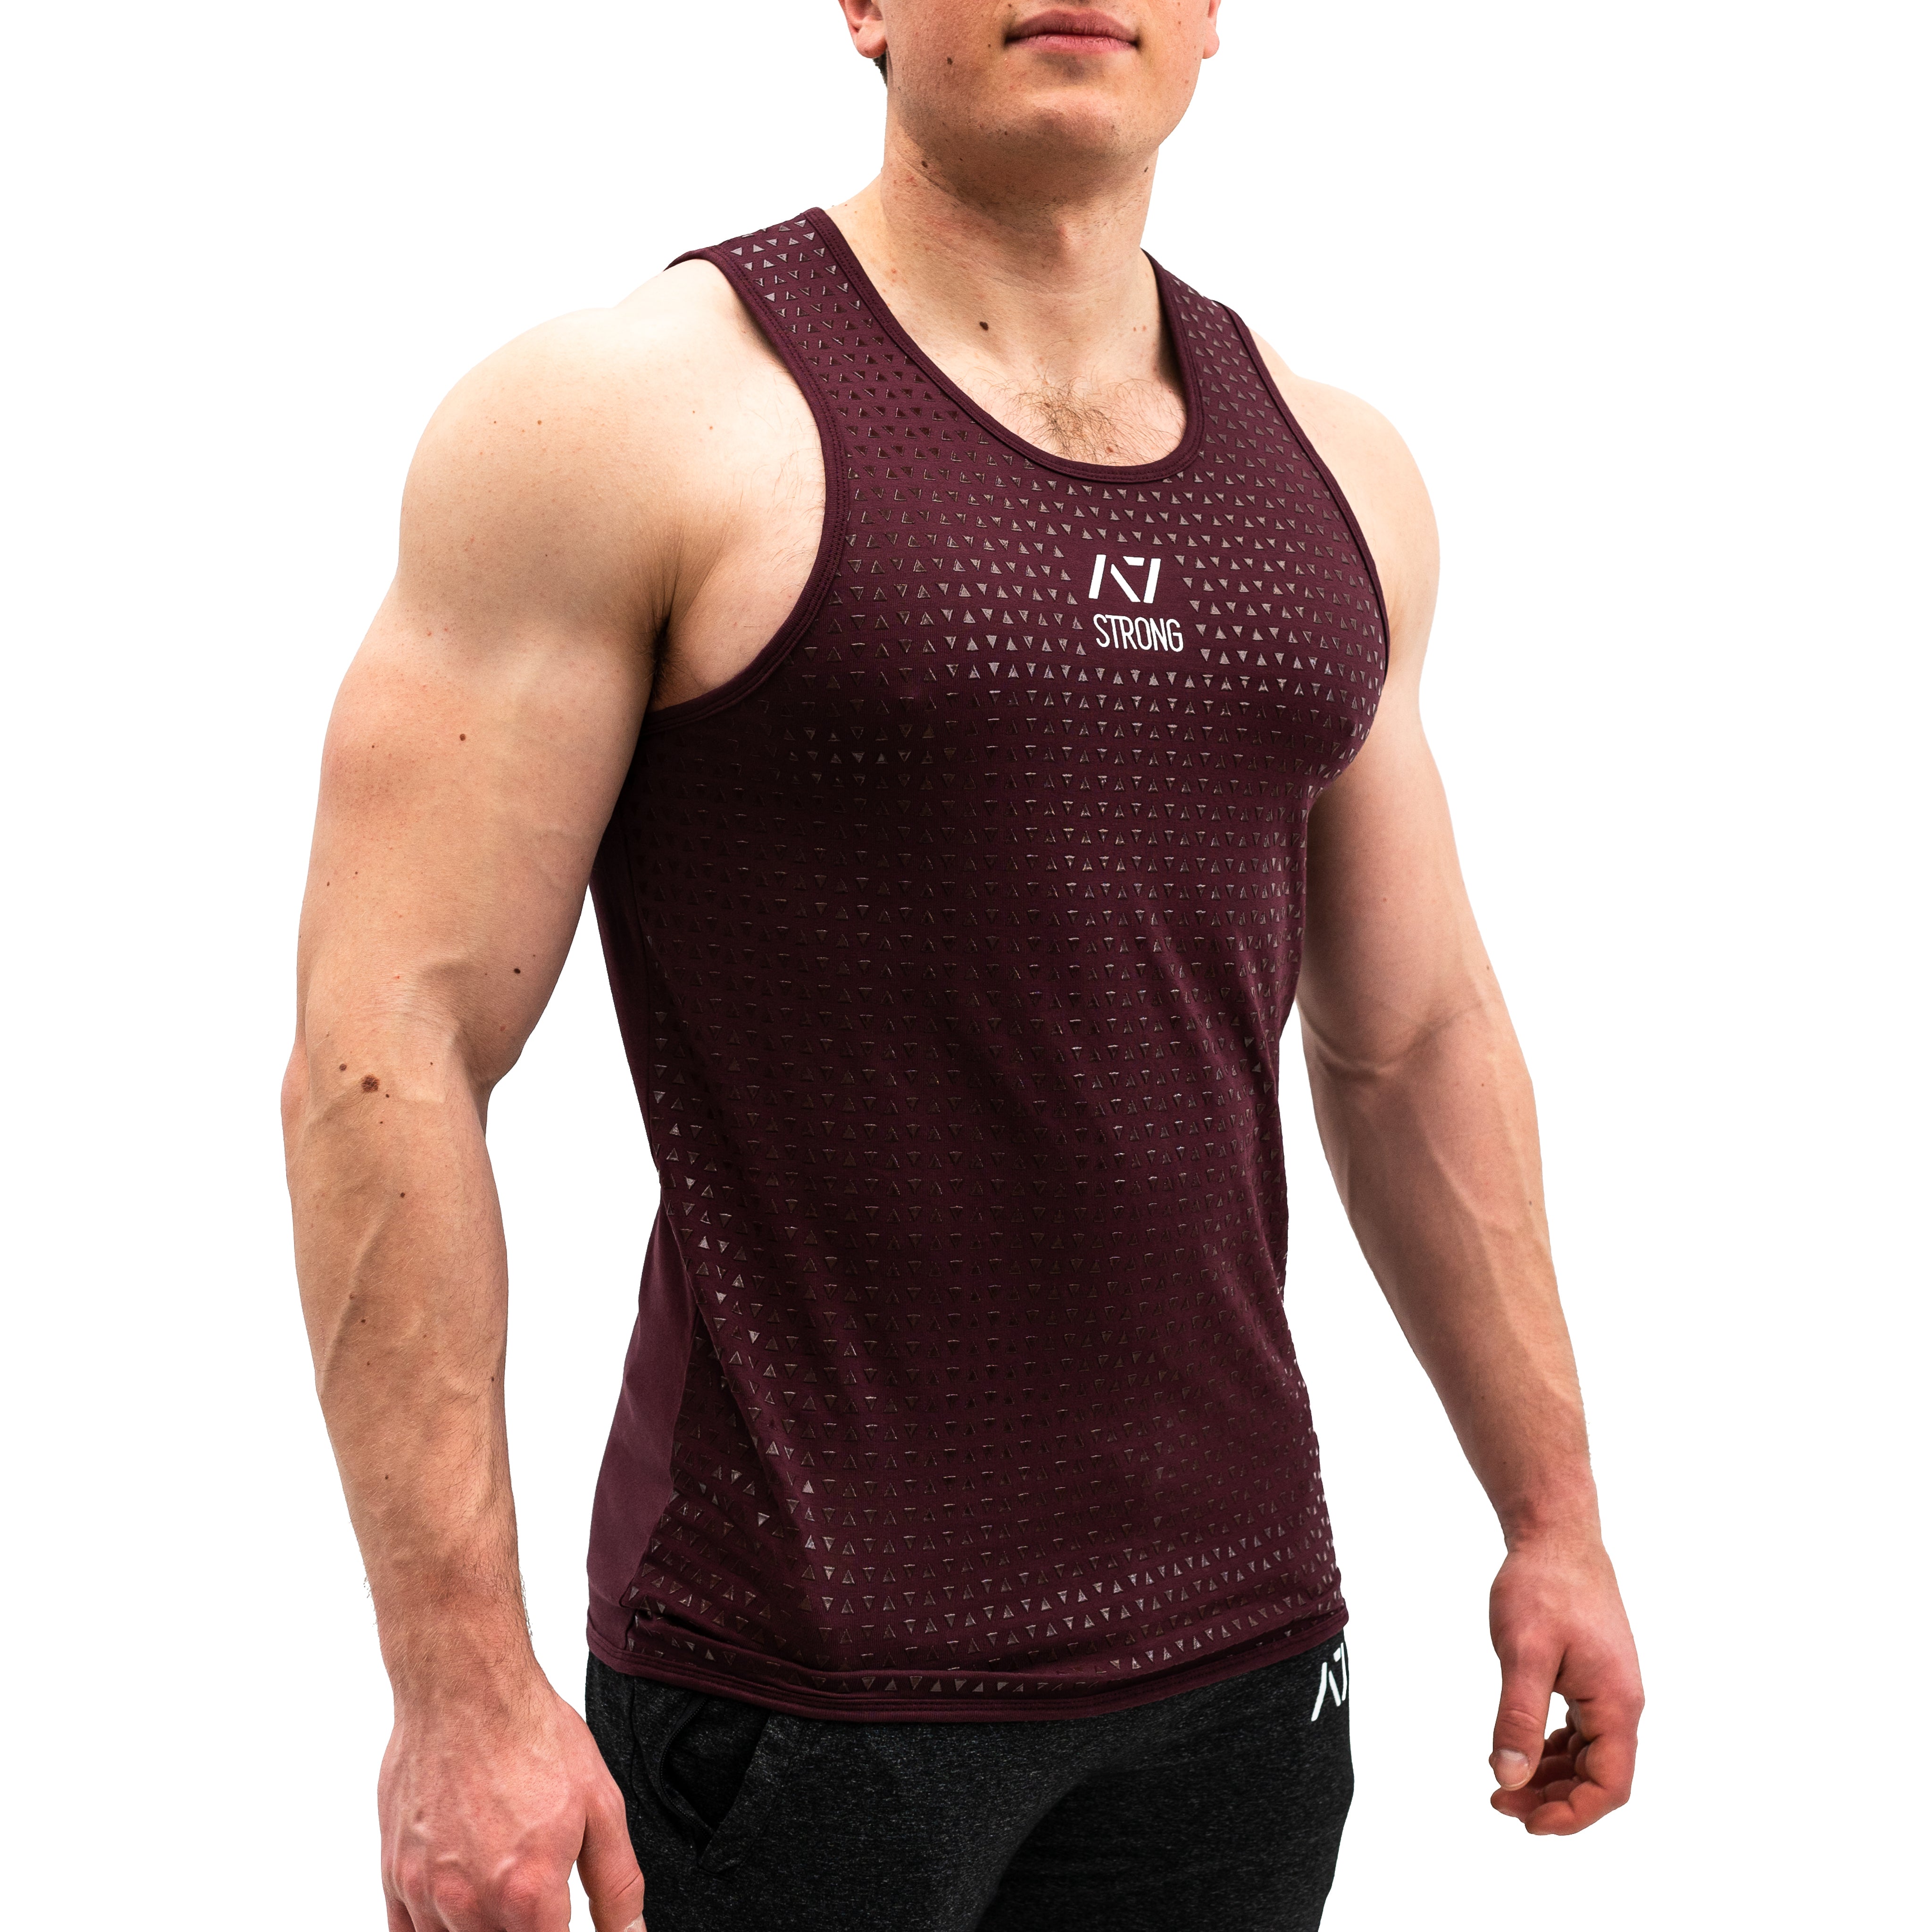 Strongman Trigon Tank, great for Strongman training. Purchase Strongman Trigon tank in UK from A7 UK. Purchase Strongman Trigon Tank in Europe from A7 Europe. No more chalk and no more sliding. Best Bar Grip Tshirts, shipping to UK and Europe from A7 UK. Strongman Trigon Tank is our newest strongman tank! A7UK supplies the best strongman apparel for all your workouts. Available in UK and Europe including France, Italy, Germany, the Netherlands, Sweden and Poland.